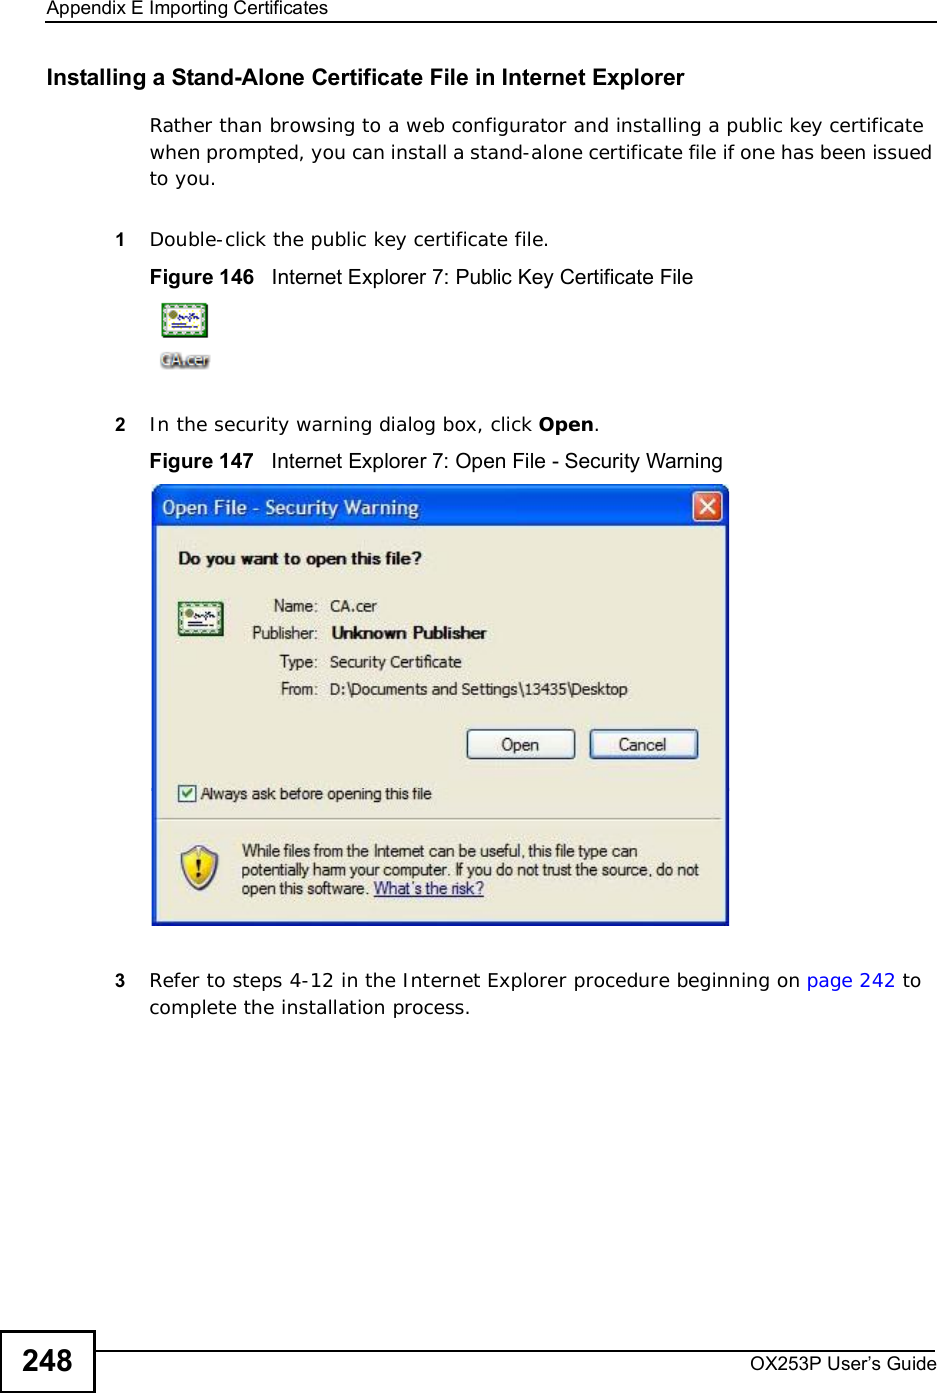 Appendix EImporting CertificatesOX253P User’s Guide248Installing a Stand-Alone Certificate File in Internet ExplorerRather than browsing to a web configurator and installing a public key certificate when prompted, you can install a stand-alone certificate file if one has been issued to you.1Double-click the public key certificate file.Figure 146   Internet Explorer 7: Public Key Certificate File2In the security warning dialog box, click Open.Figure 147   Internet Explorer 7: Open File - Security Warning3Refer to steps 4-12 in the Internet Explorer procedure beginning on page242 to complete the installation process.